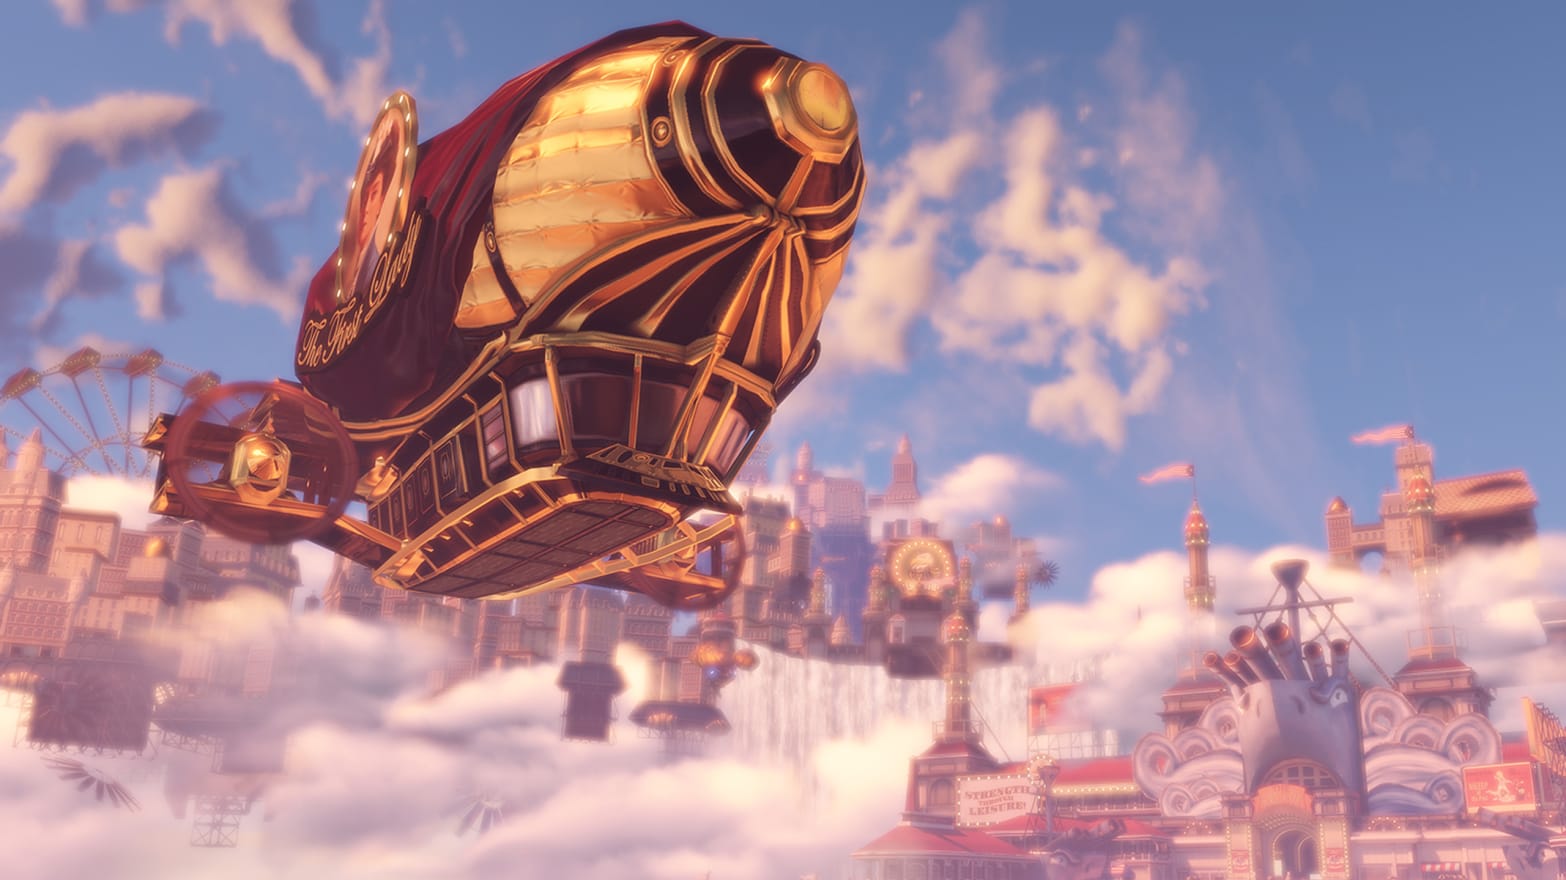 BioShock Infinite' Review: Already the Game of the Year